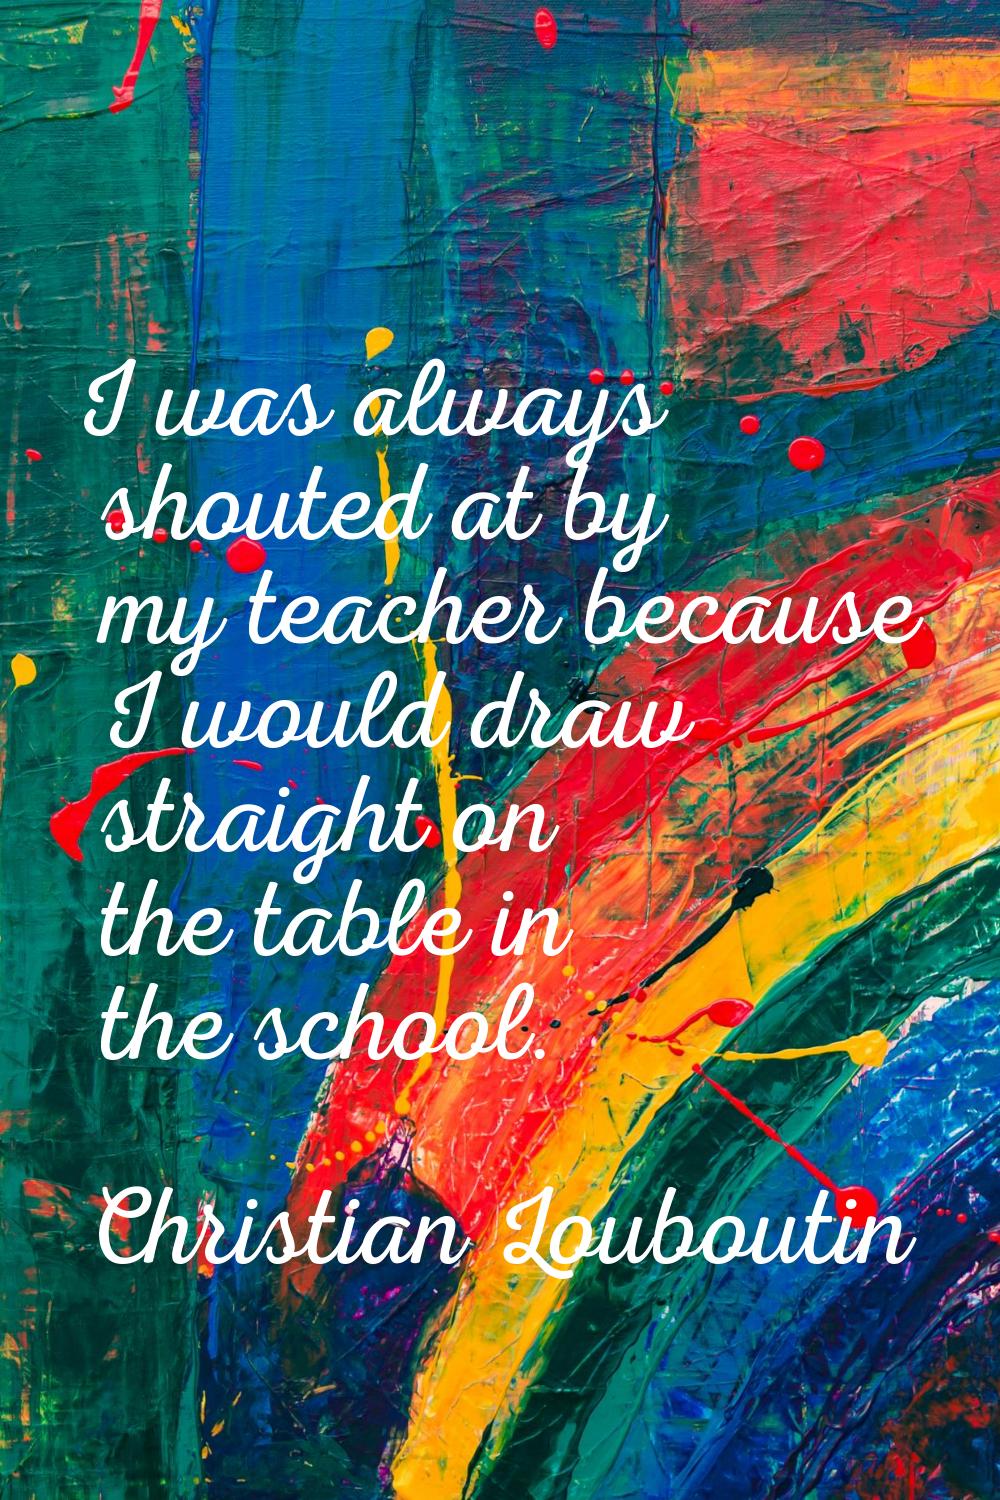 I was always shouted at by my teacher because I would draw straight on the table in the school.